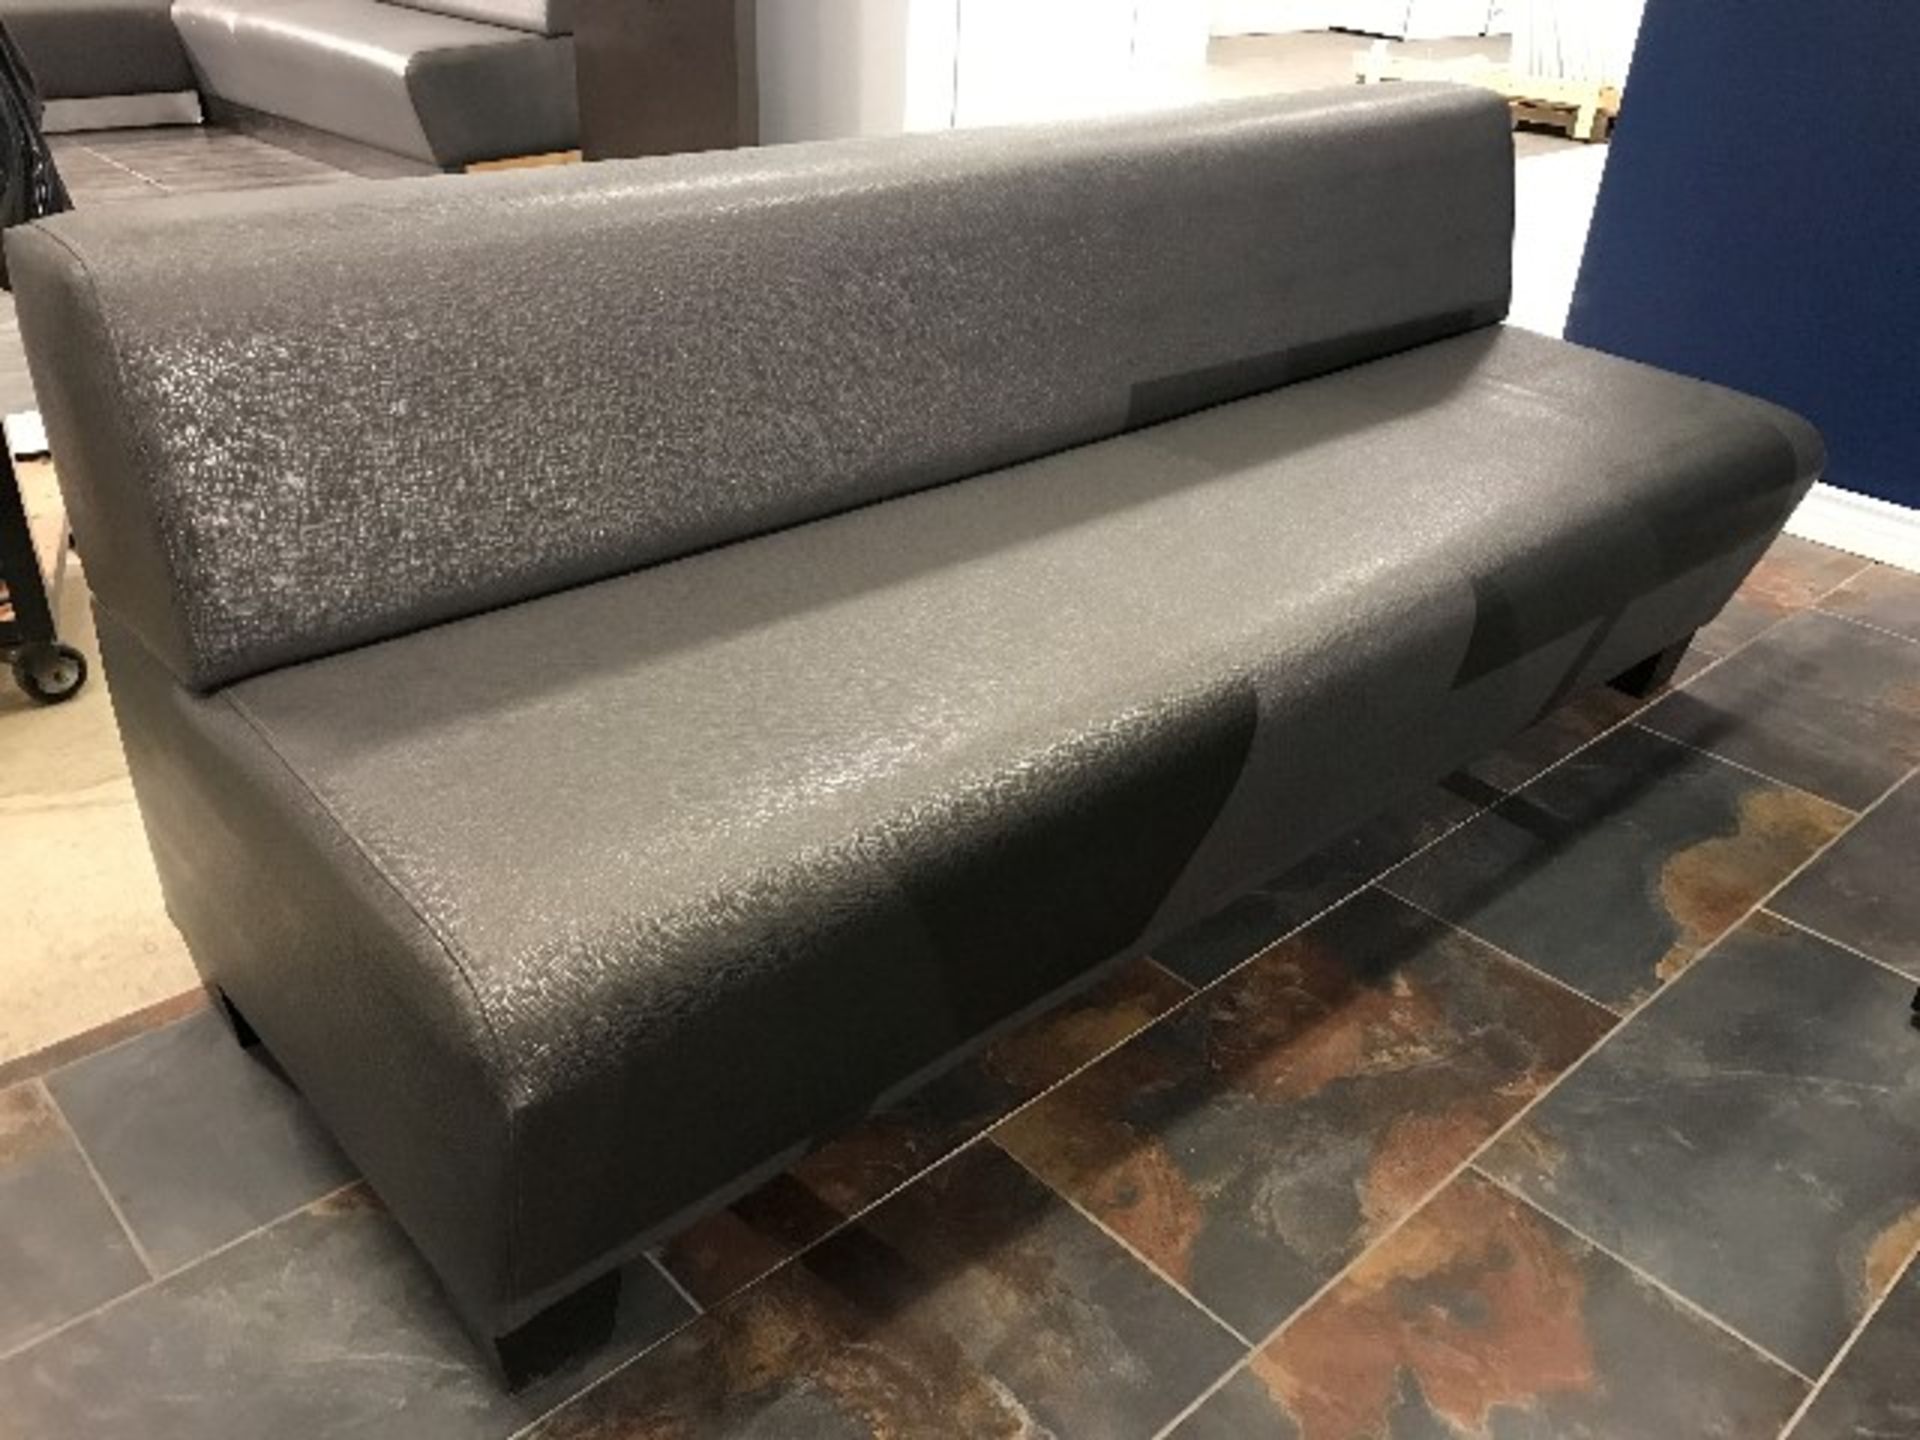 Banquette bench, finish all sides, W. 72”, 3 pcs